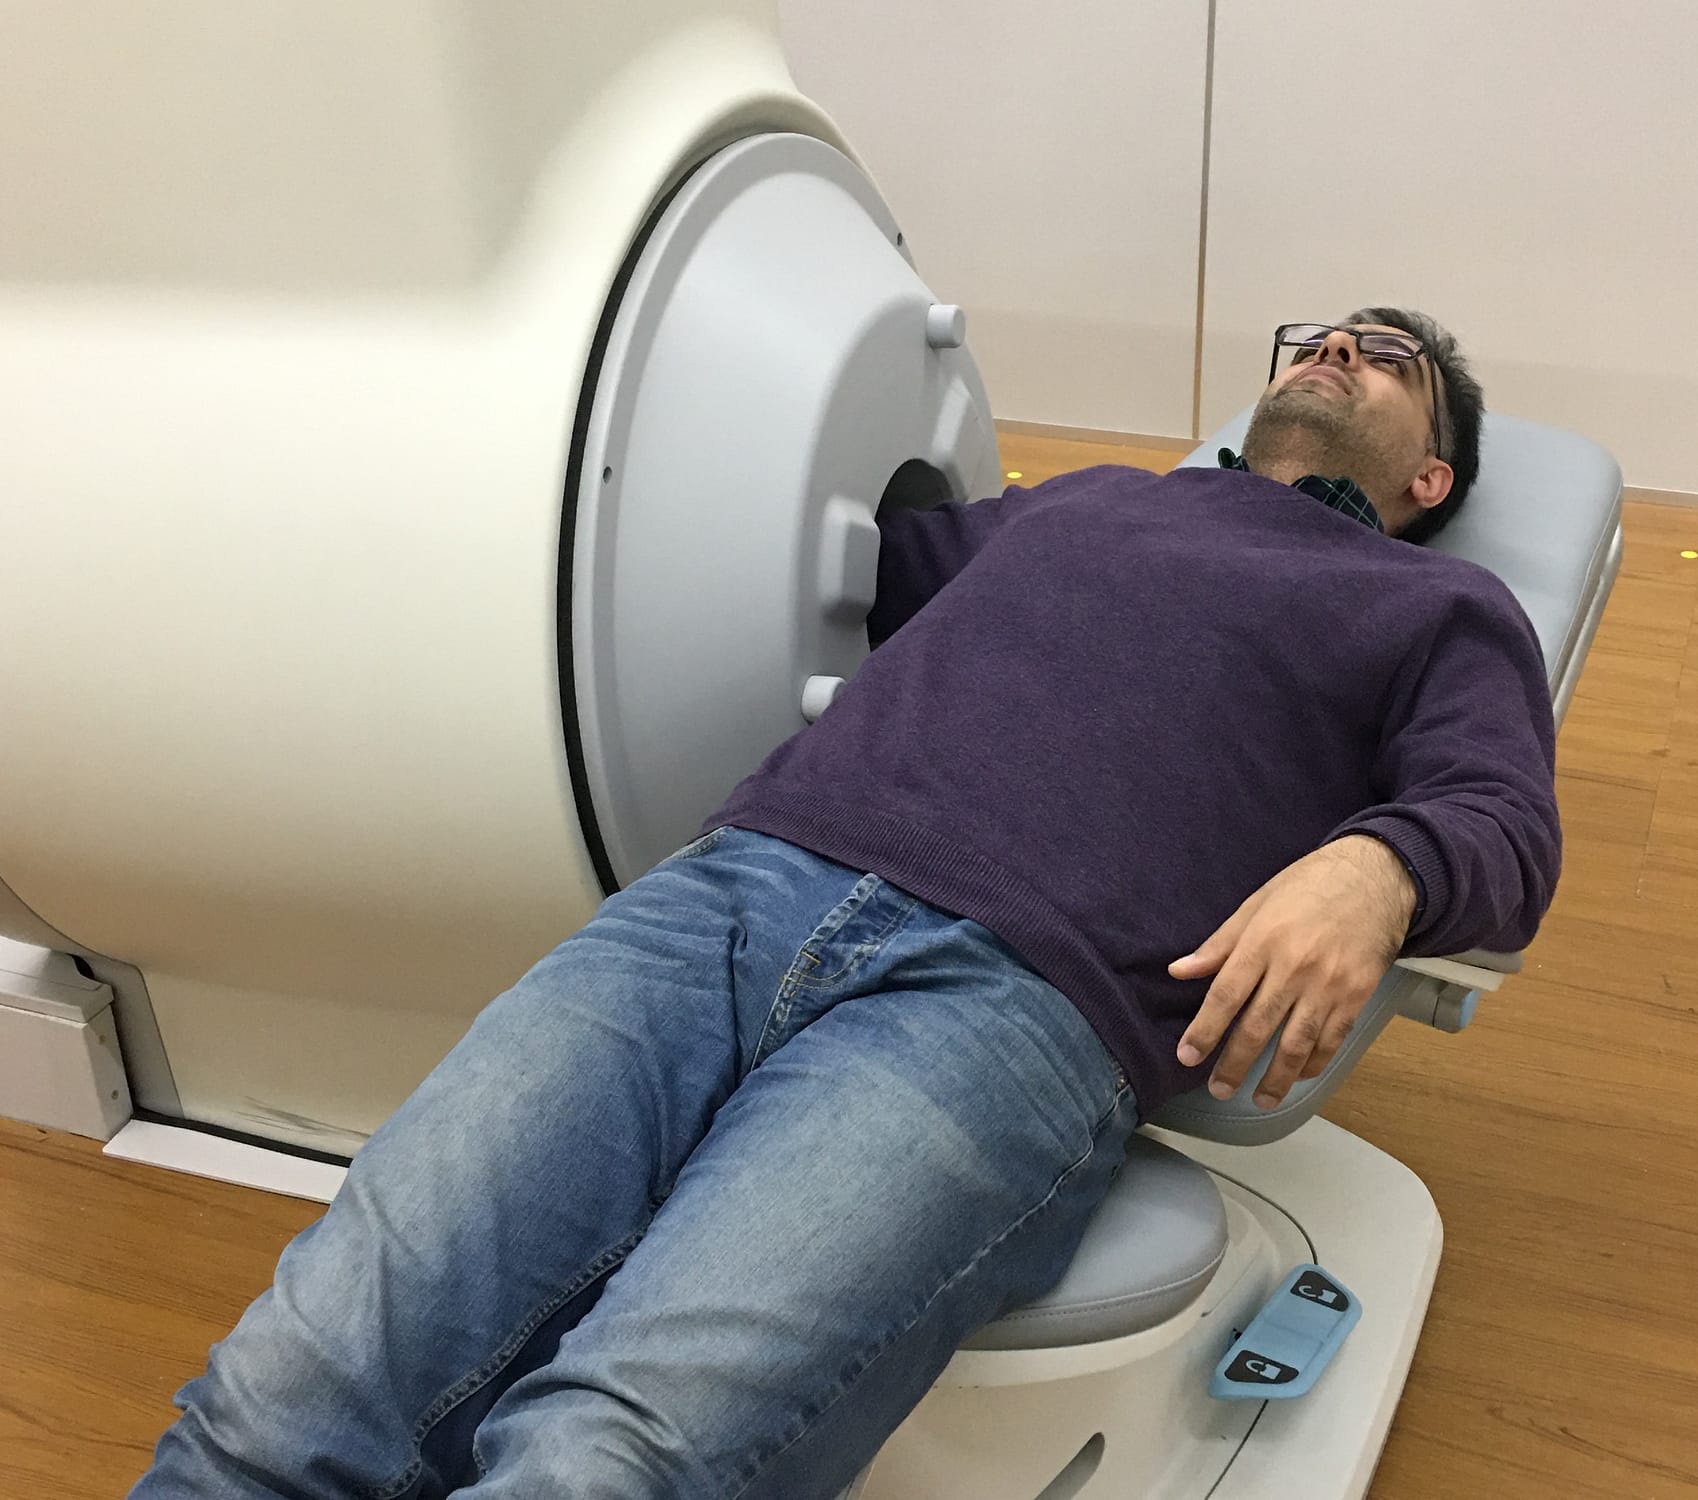 Compact MRI Systems for extremities - The patient getting an MRI scan of the arm.